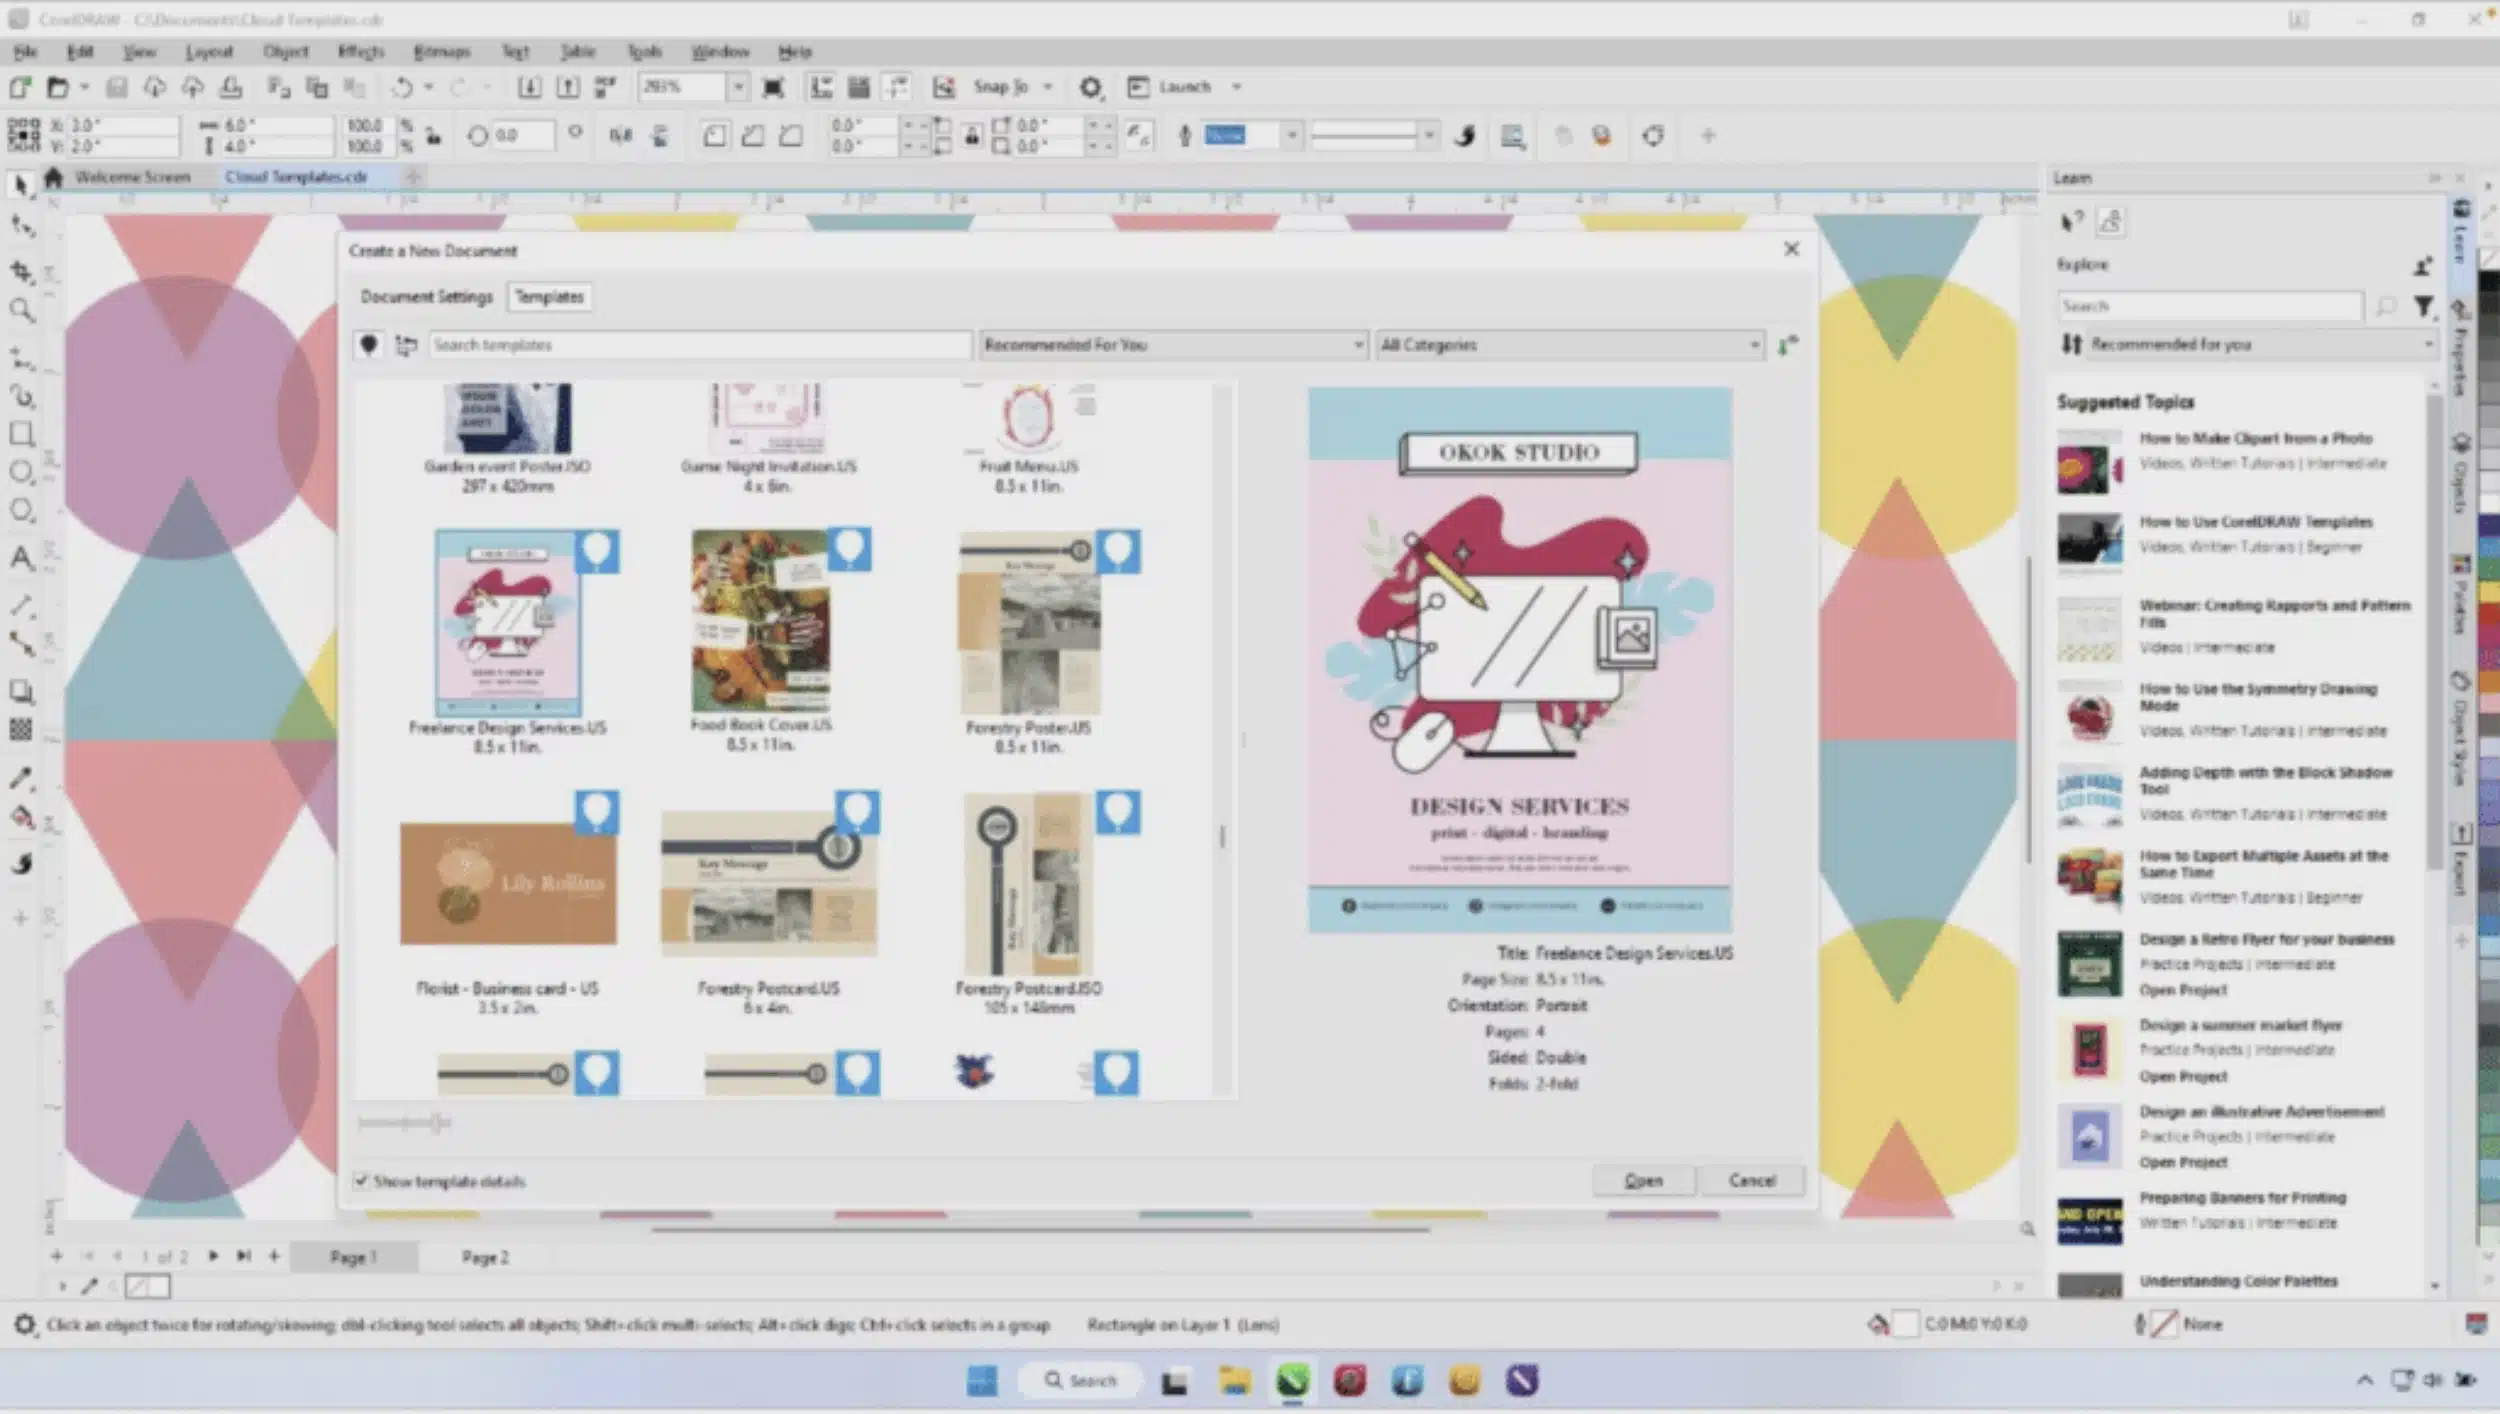 Users have access to 200-plus design templates in CorelDRAW’s cloud template library.